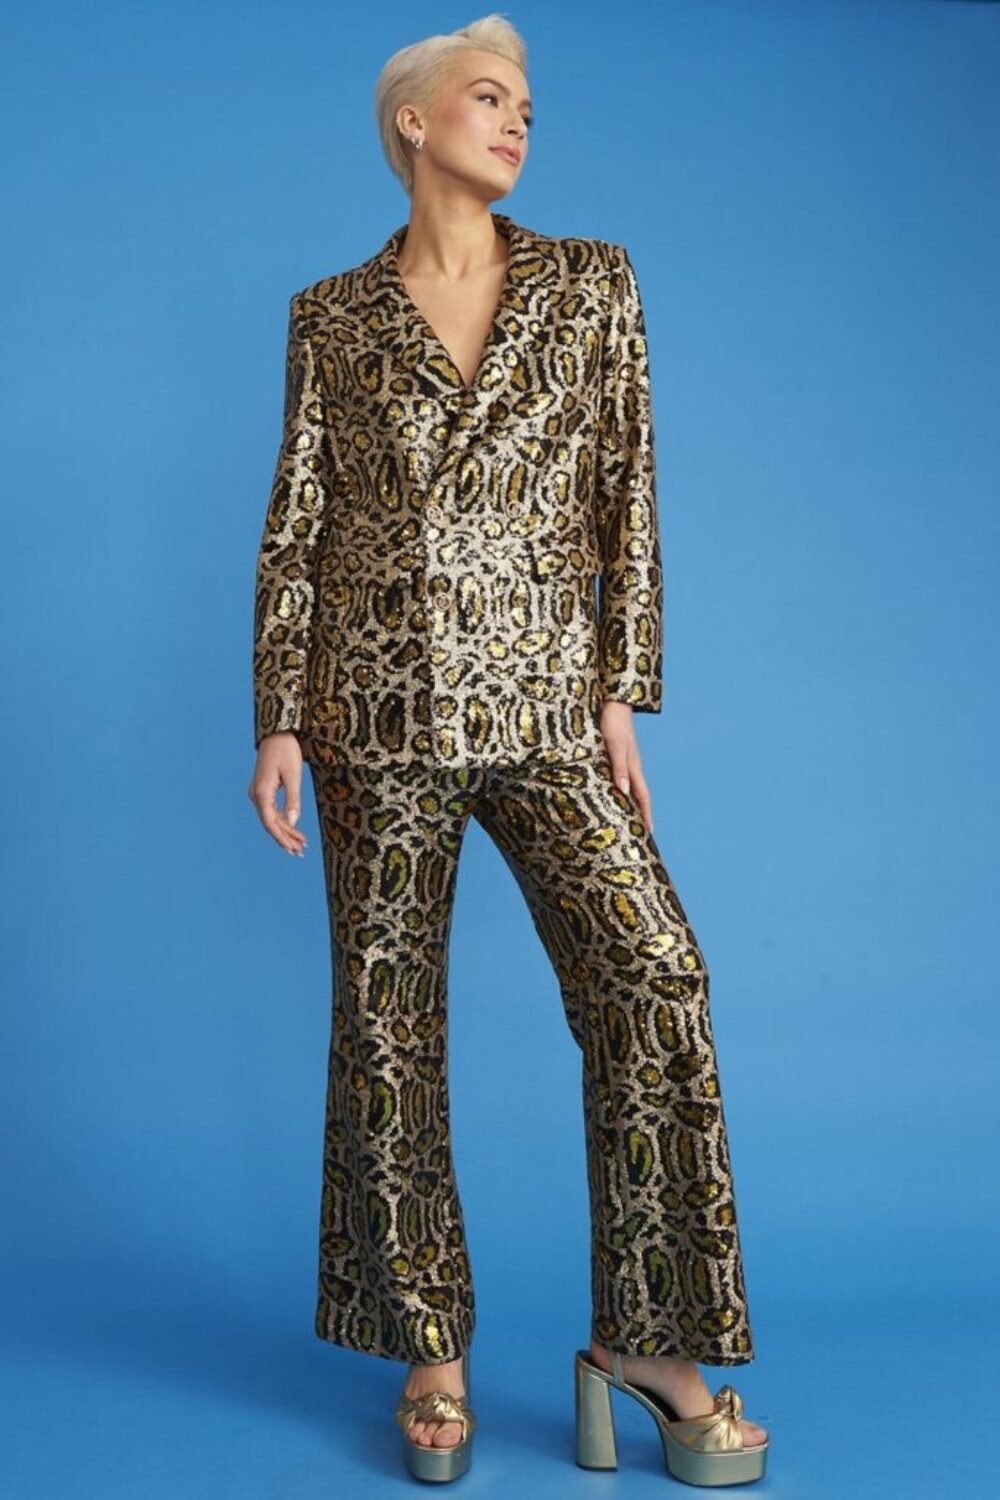 Shop Lux Gold Animal Print Sequin Blazer and women's luxury and designer clothes at www.lux-apparel.co.uk